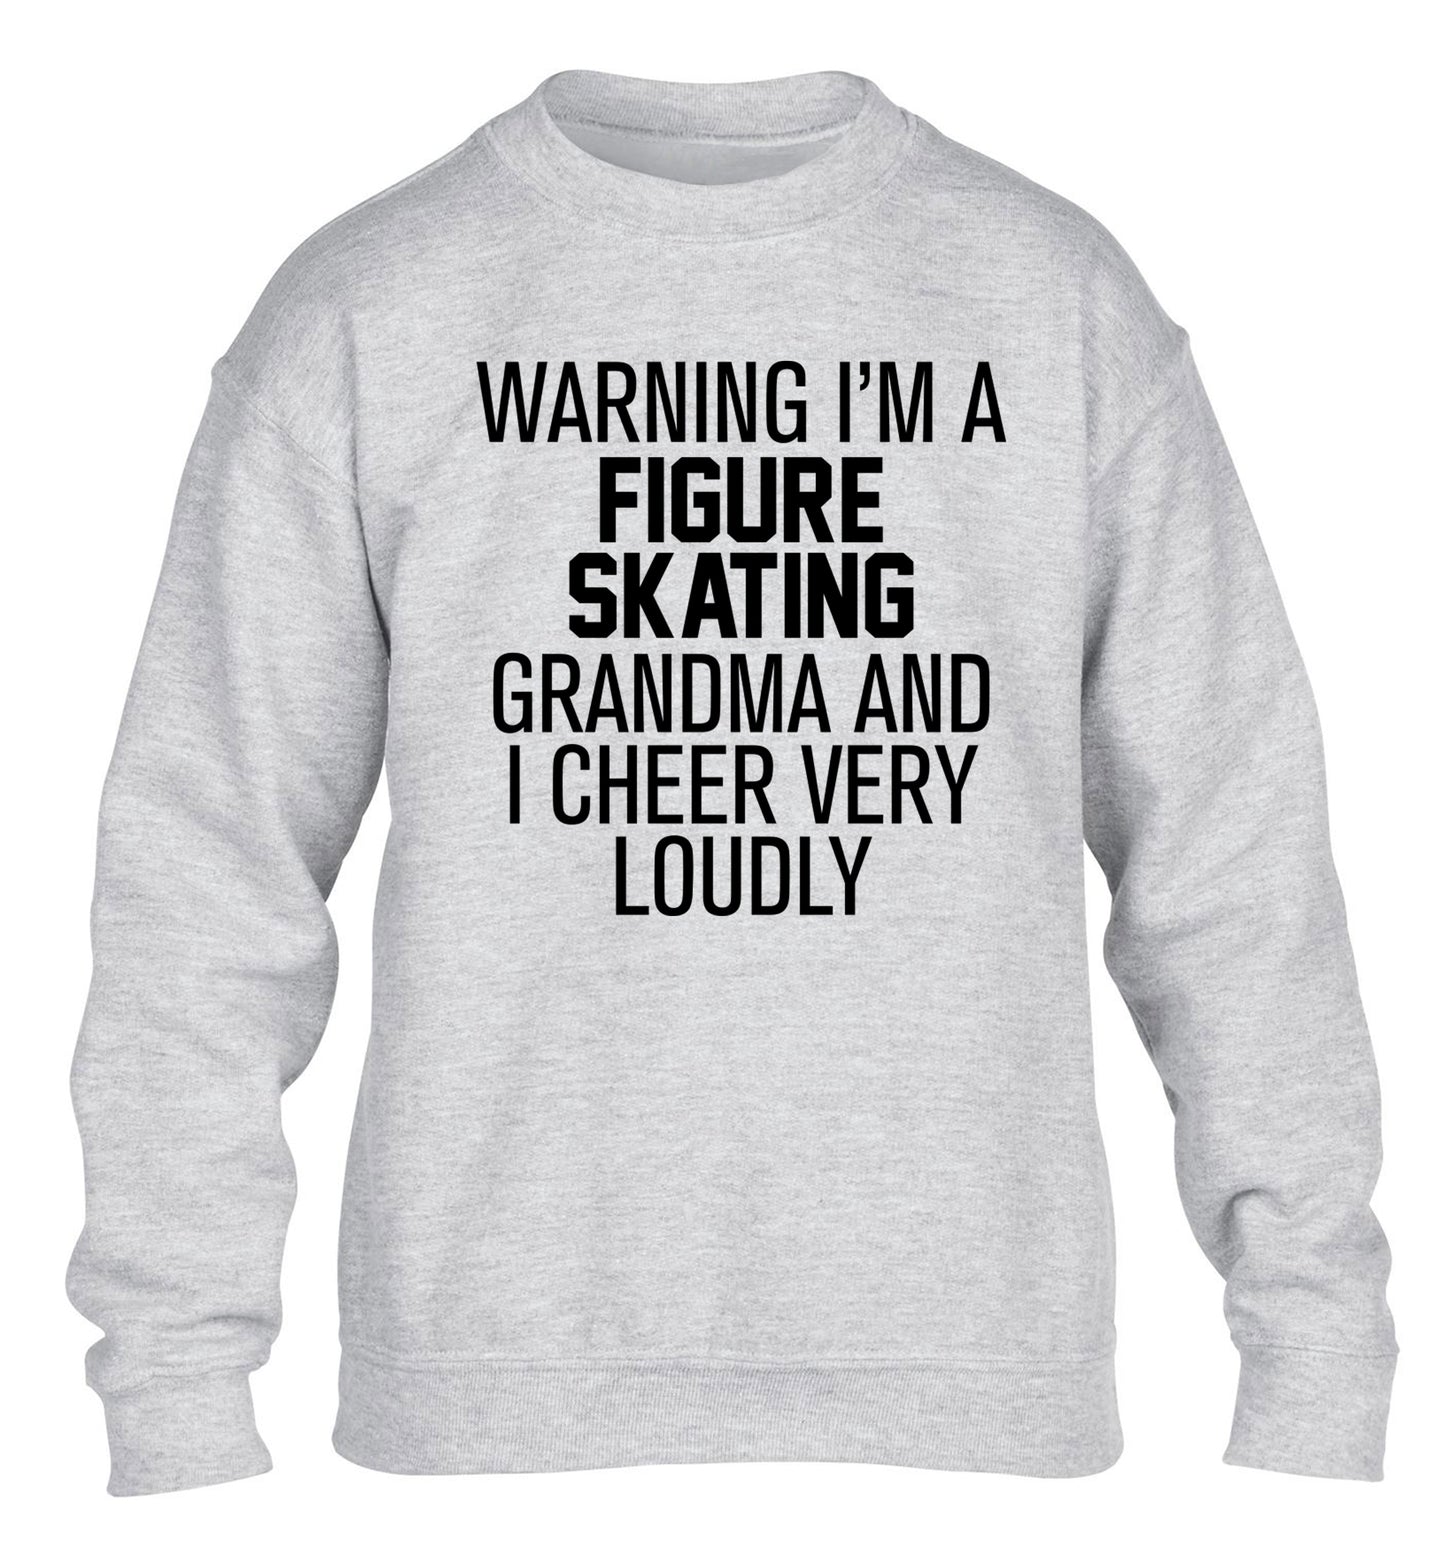 Warning I'm a figure skating grandma and I cheer very loudly children's grey sweater 12-14 Years